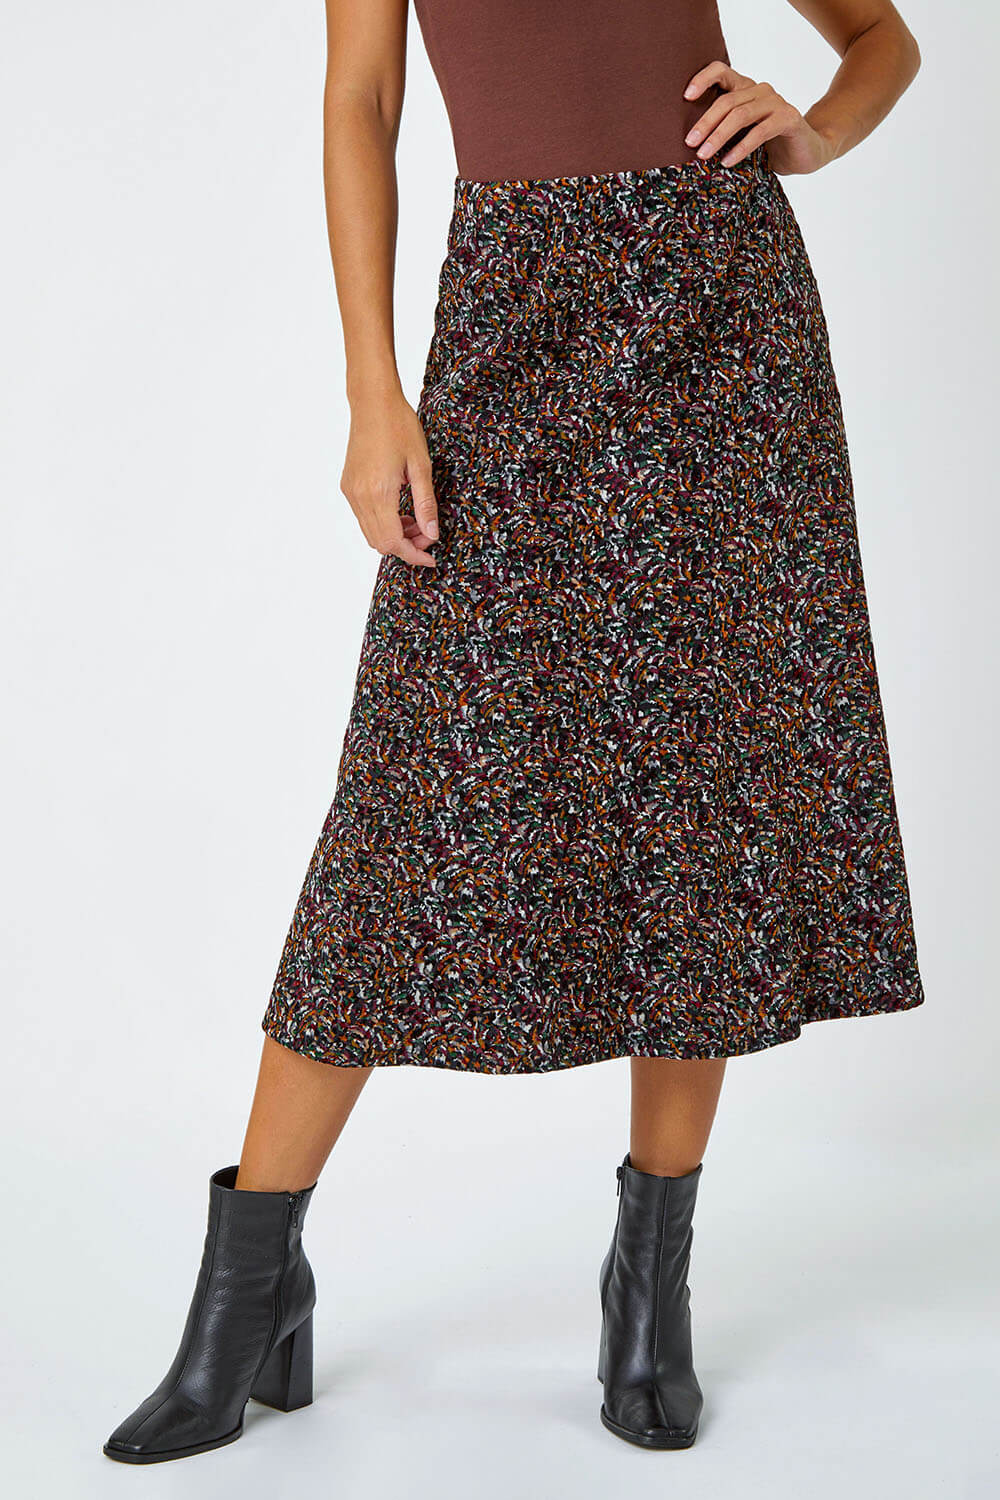 Multi  Textured Abstract Print Stretch Skirt, Image 4 of 5